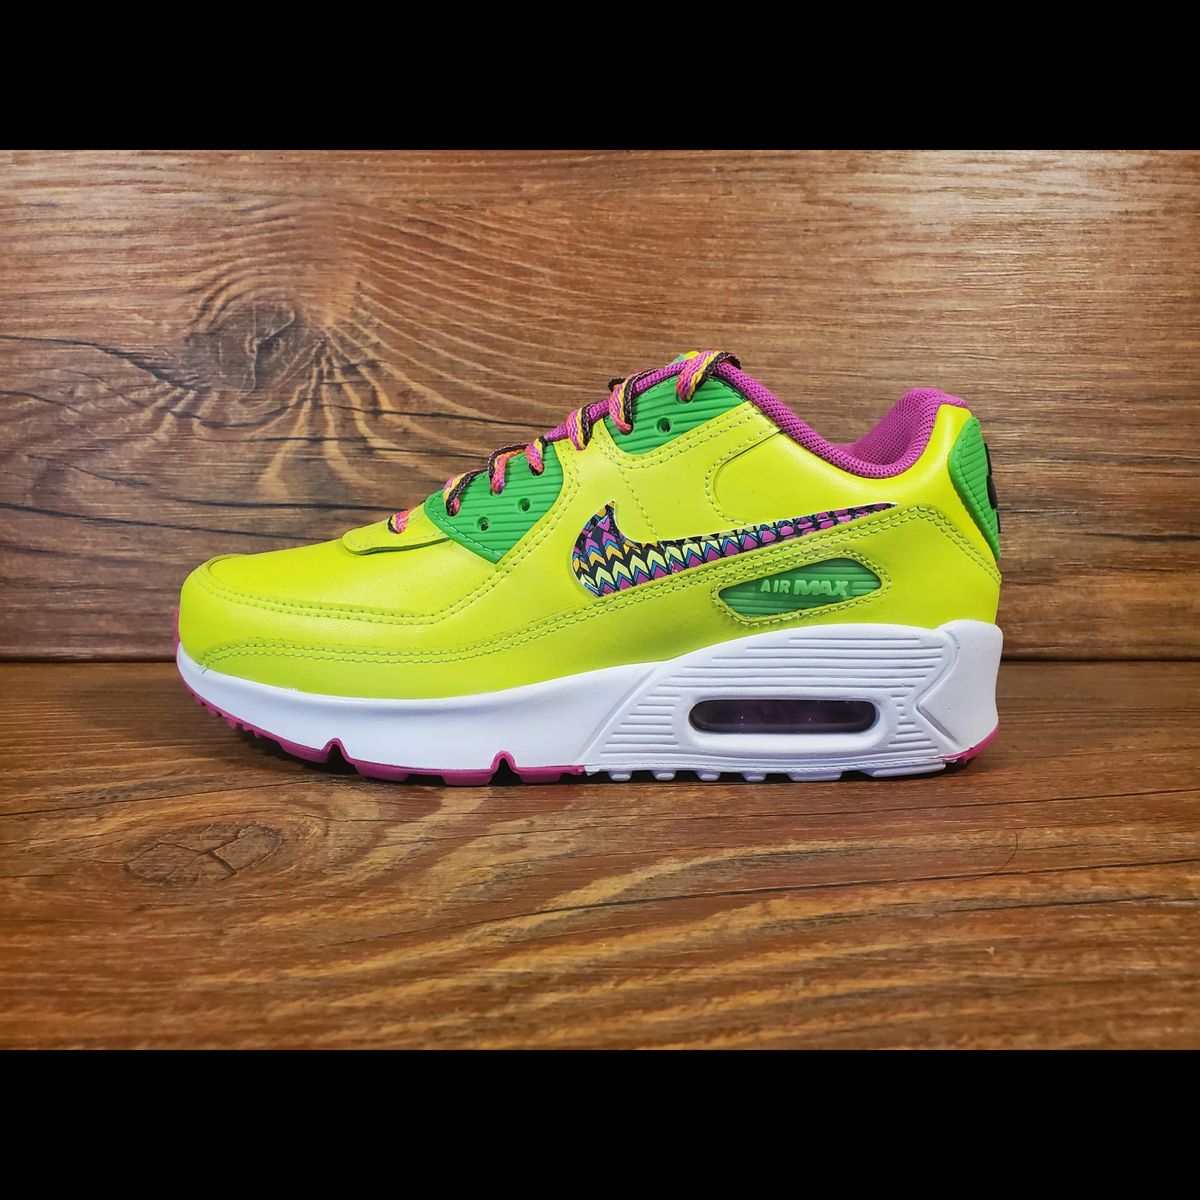 Nike Air Max 90 Leather GS "Volt Fire Pink"